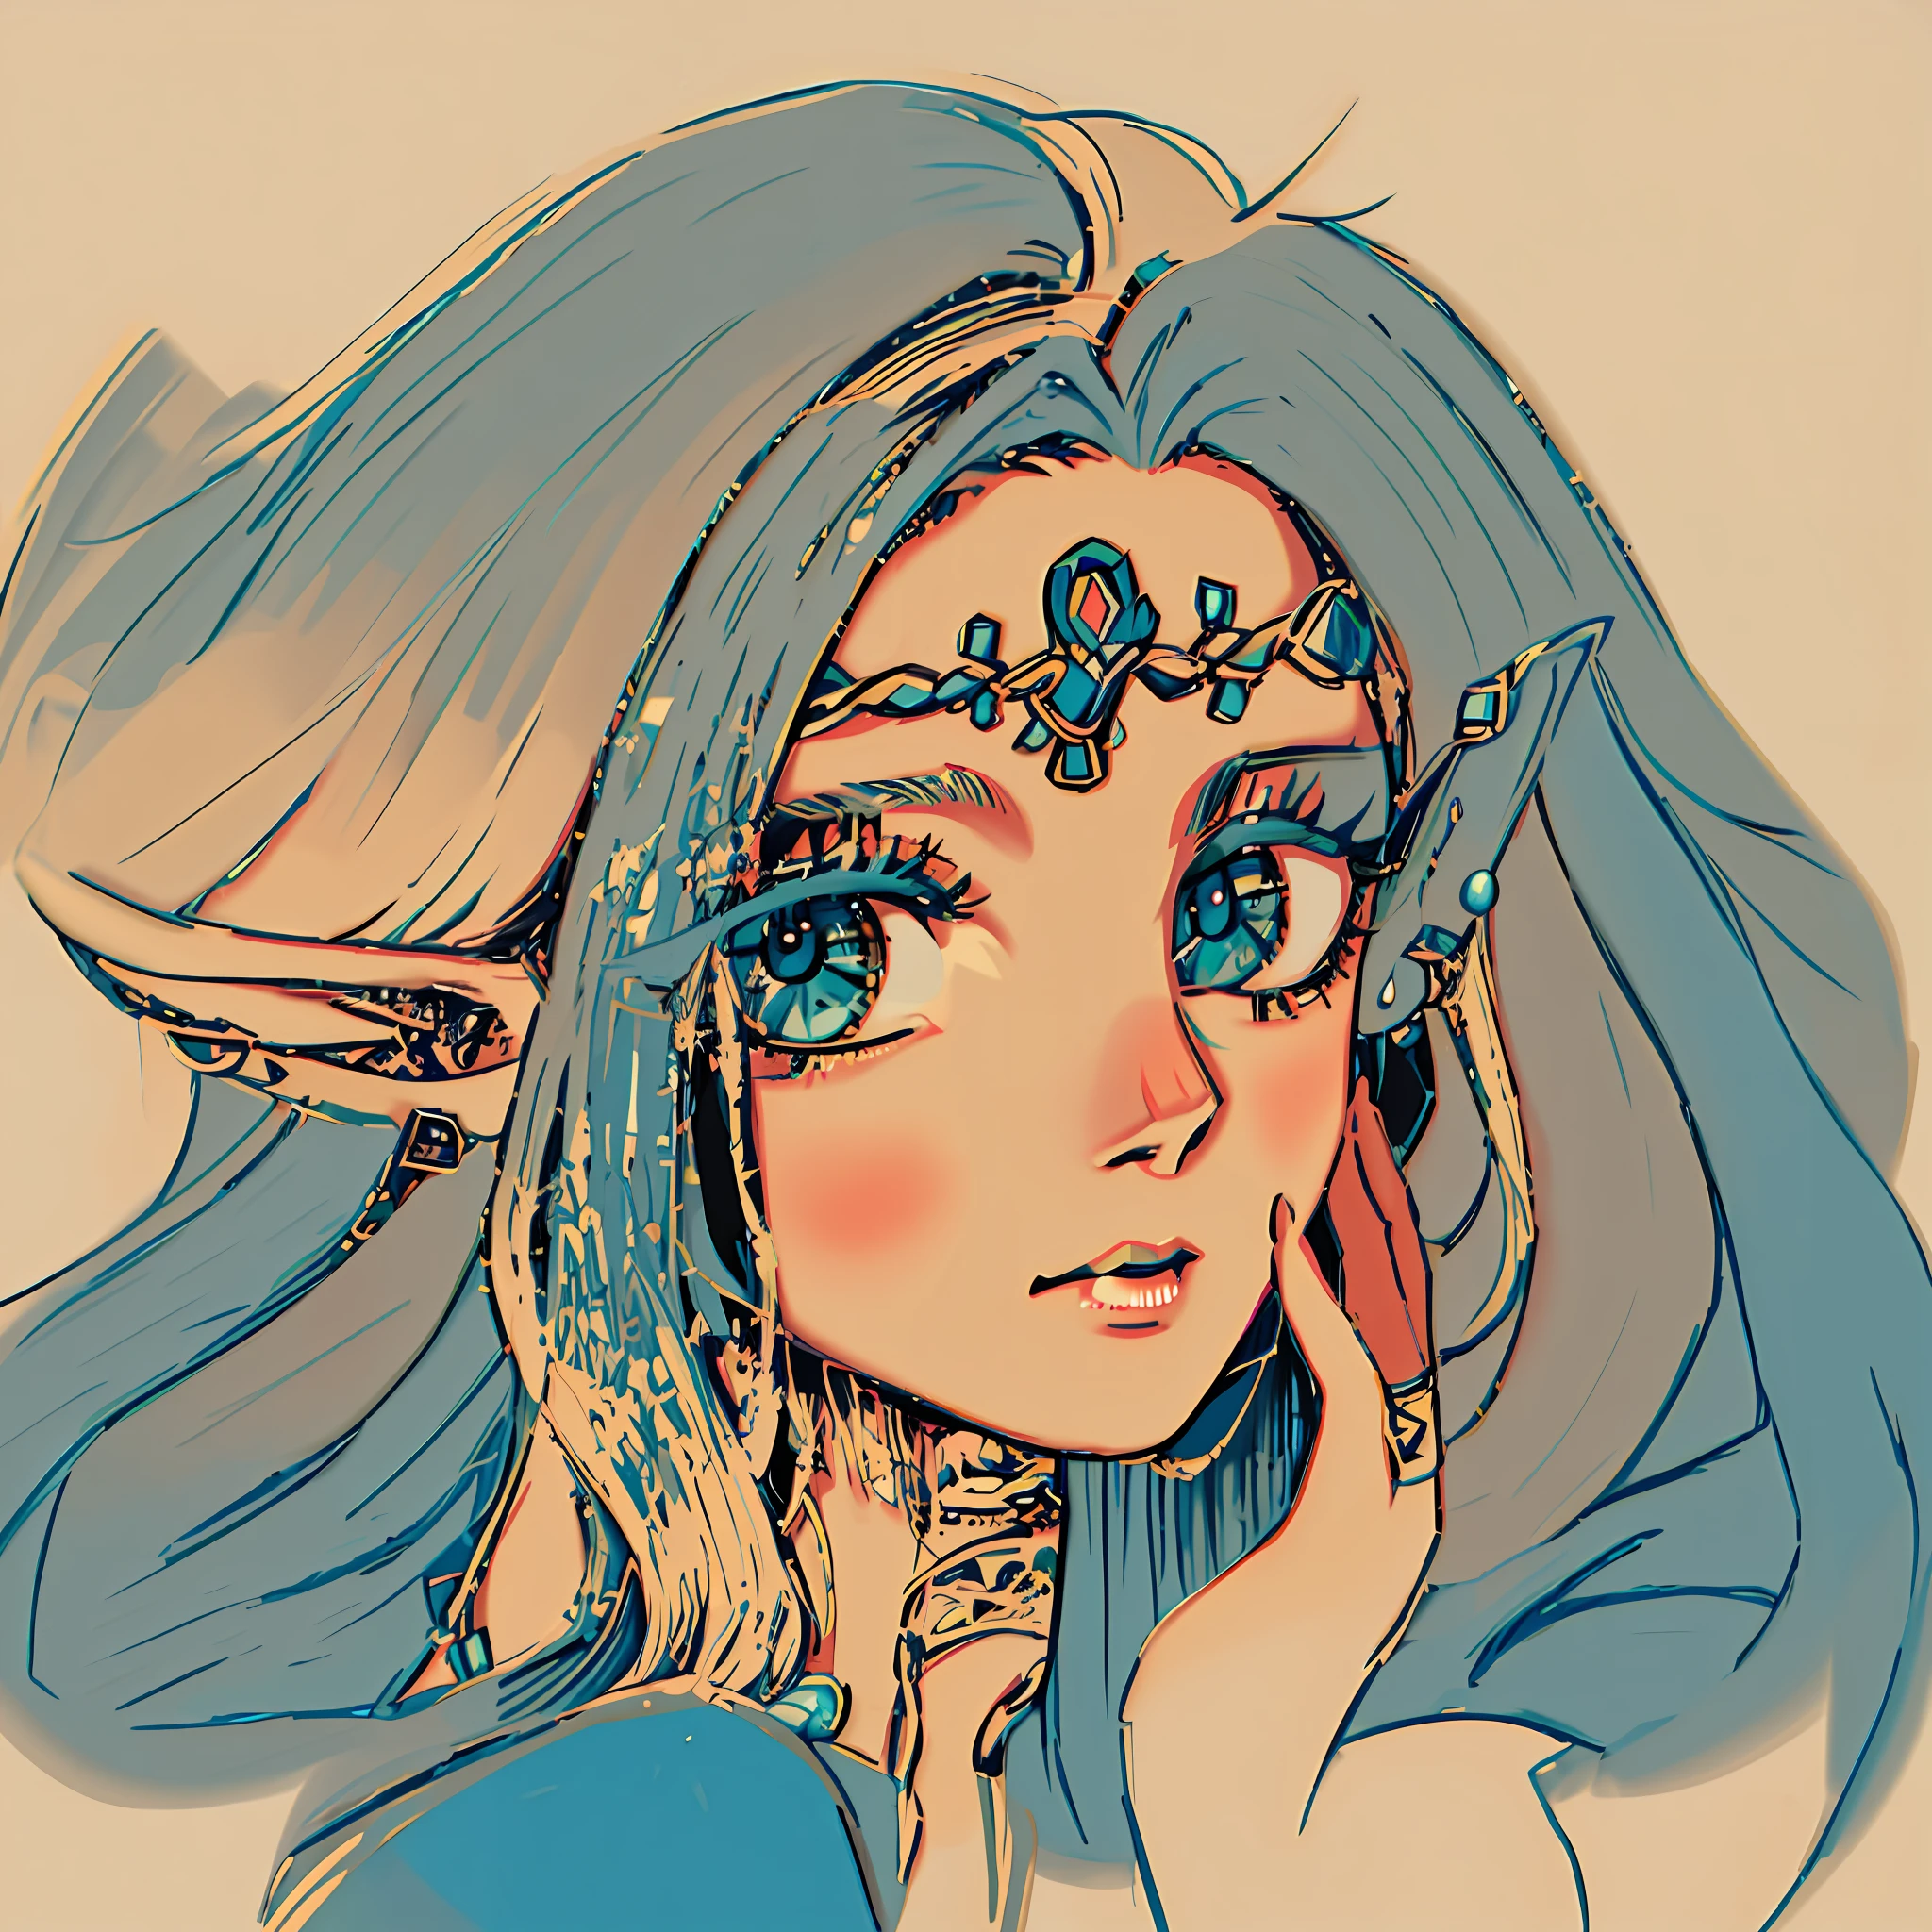 A painting of a woman with horns and a face with flowers on her forehead, portrait of princess zelda, portrait of an elf queen, portrait of an elf, portrait of an elf, Elf Girl, portrait of zelda, Elf Princess, An elf queen, anime sketch, Anime Paintings, portrait of very beautiful elf, drawn in the style of artgerm